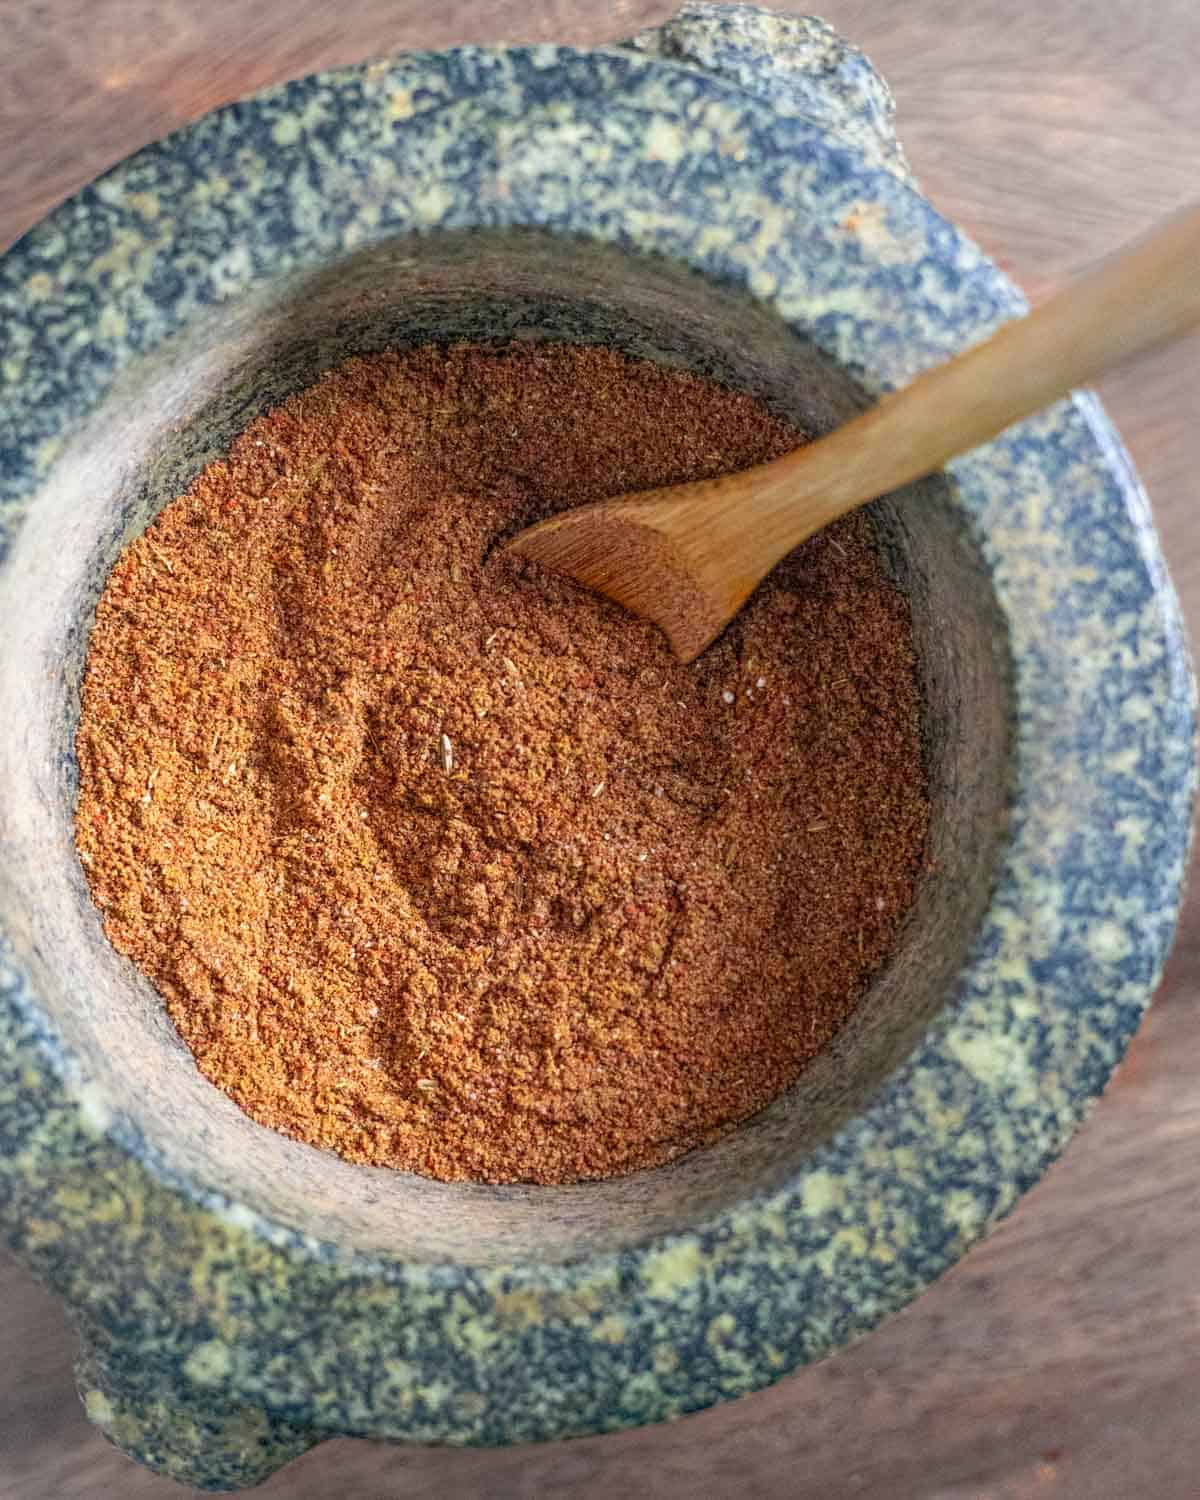 Powdered pulled pork rub in a granite mortar with a small wood spoon in the bowl.